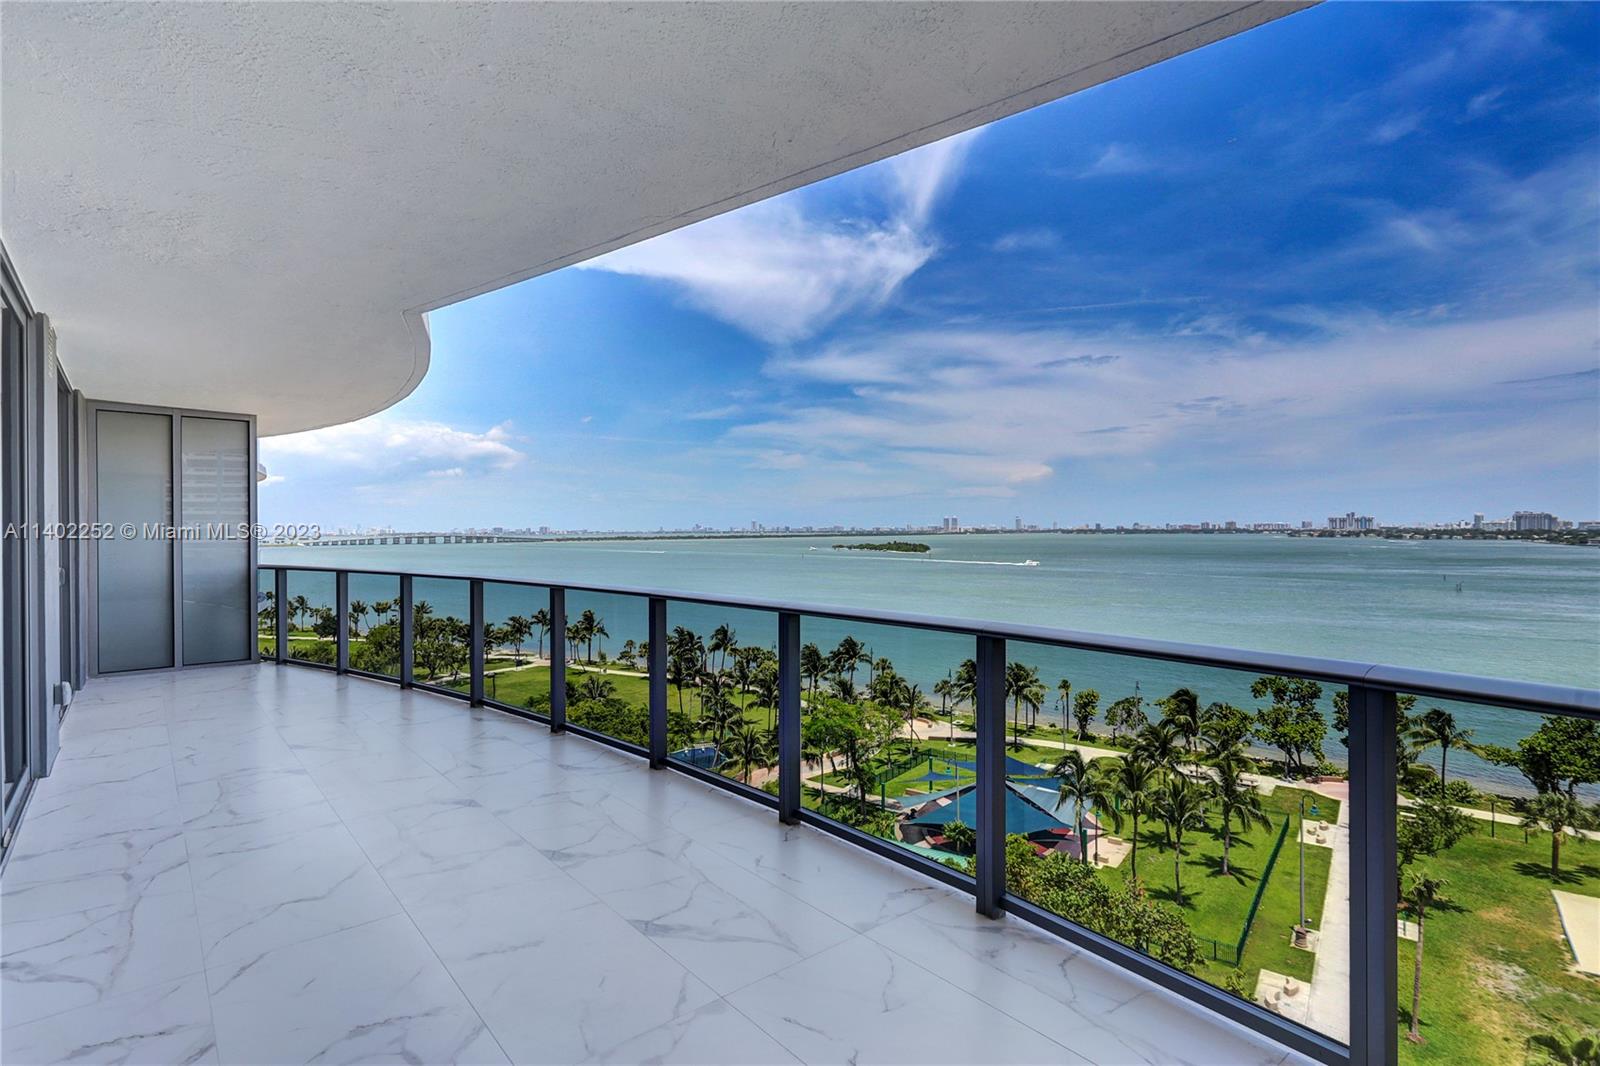 Amazing 2 Bed/2.5 Baths at luxurious Aria on the Bay; Unit features Stunning Calacata flooring throughout the whole living area and also in the expansive Balcony, where you can enjoy Direct Water views from every room, Open floor plan, Master bathroom with Shower and Separate Bathtub, Closets ready., Bring your Pickiest clients to experience the total Miami lifestyle. Aria on the Bay has resort style amenities like Club House, Conference areas, Sunrise and sunset Pool, Jacuzzi, BBQ Summer kitchen style, Spa, Spacious gym facilities, Movie theater, Game room, Club house for kids And in front beautiful Margaret Pace park, where you can also enjoy tennis, beach volleyball, weights, playground for kids, playground for Dogs, Basketball and Public MARINA!